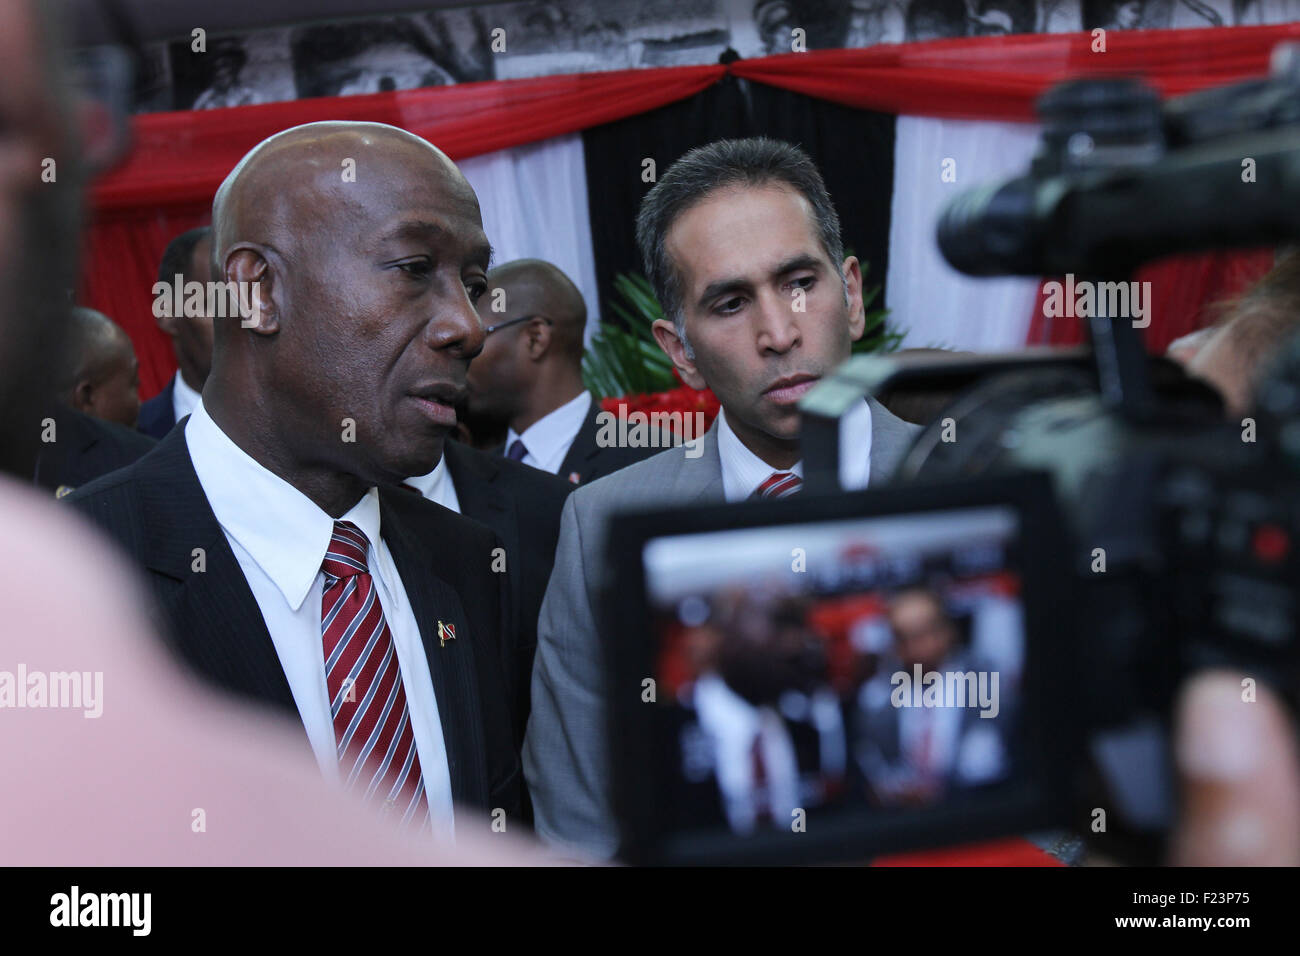 Port of Spain, Trinidad & Tobago. 9th September, 2015. Keith Christopher Rowley (L), Prime Minister of Trinidad & Tobago, and newly-appointed Attorney General Faris Al-Rawi speak to journalists at their swearing-in ceremony at Queen's Hall in Port of Spain, Trinidad on September 9, 2015.  (Photo by Sean Drakes/LatinContent/Getty Images) Credit:  SEAN DRAKES/Alamy Live News Stock Photo